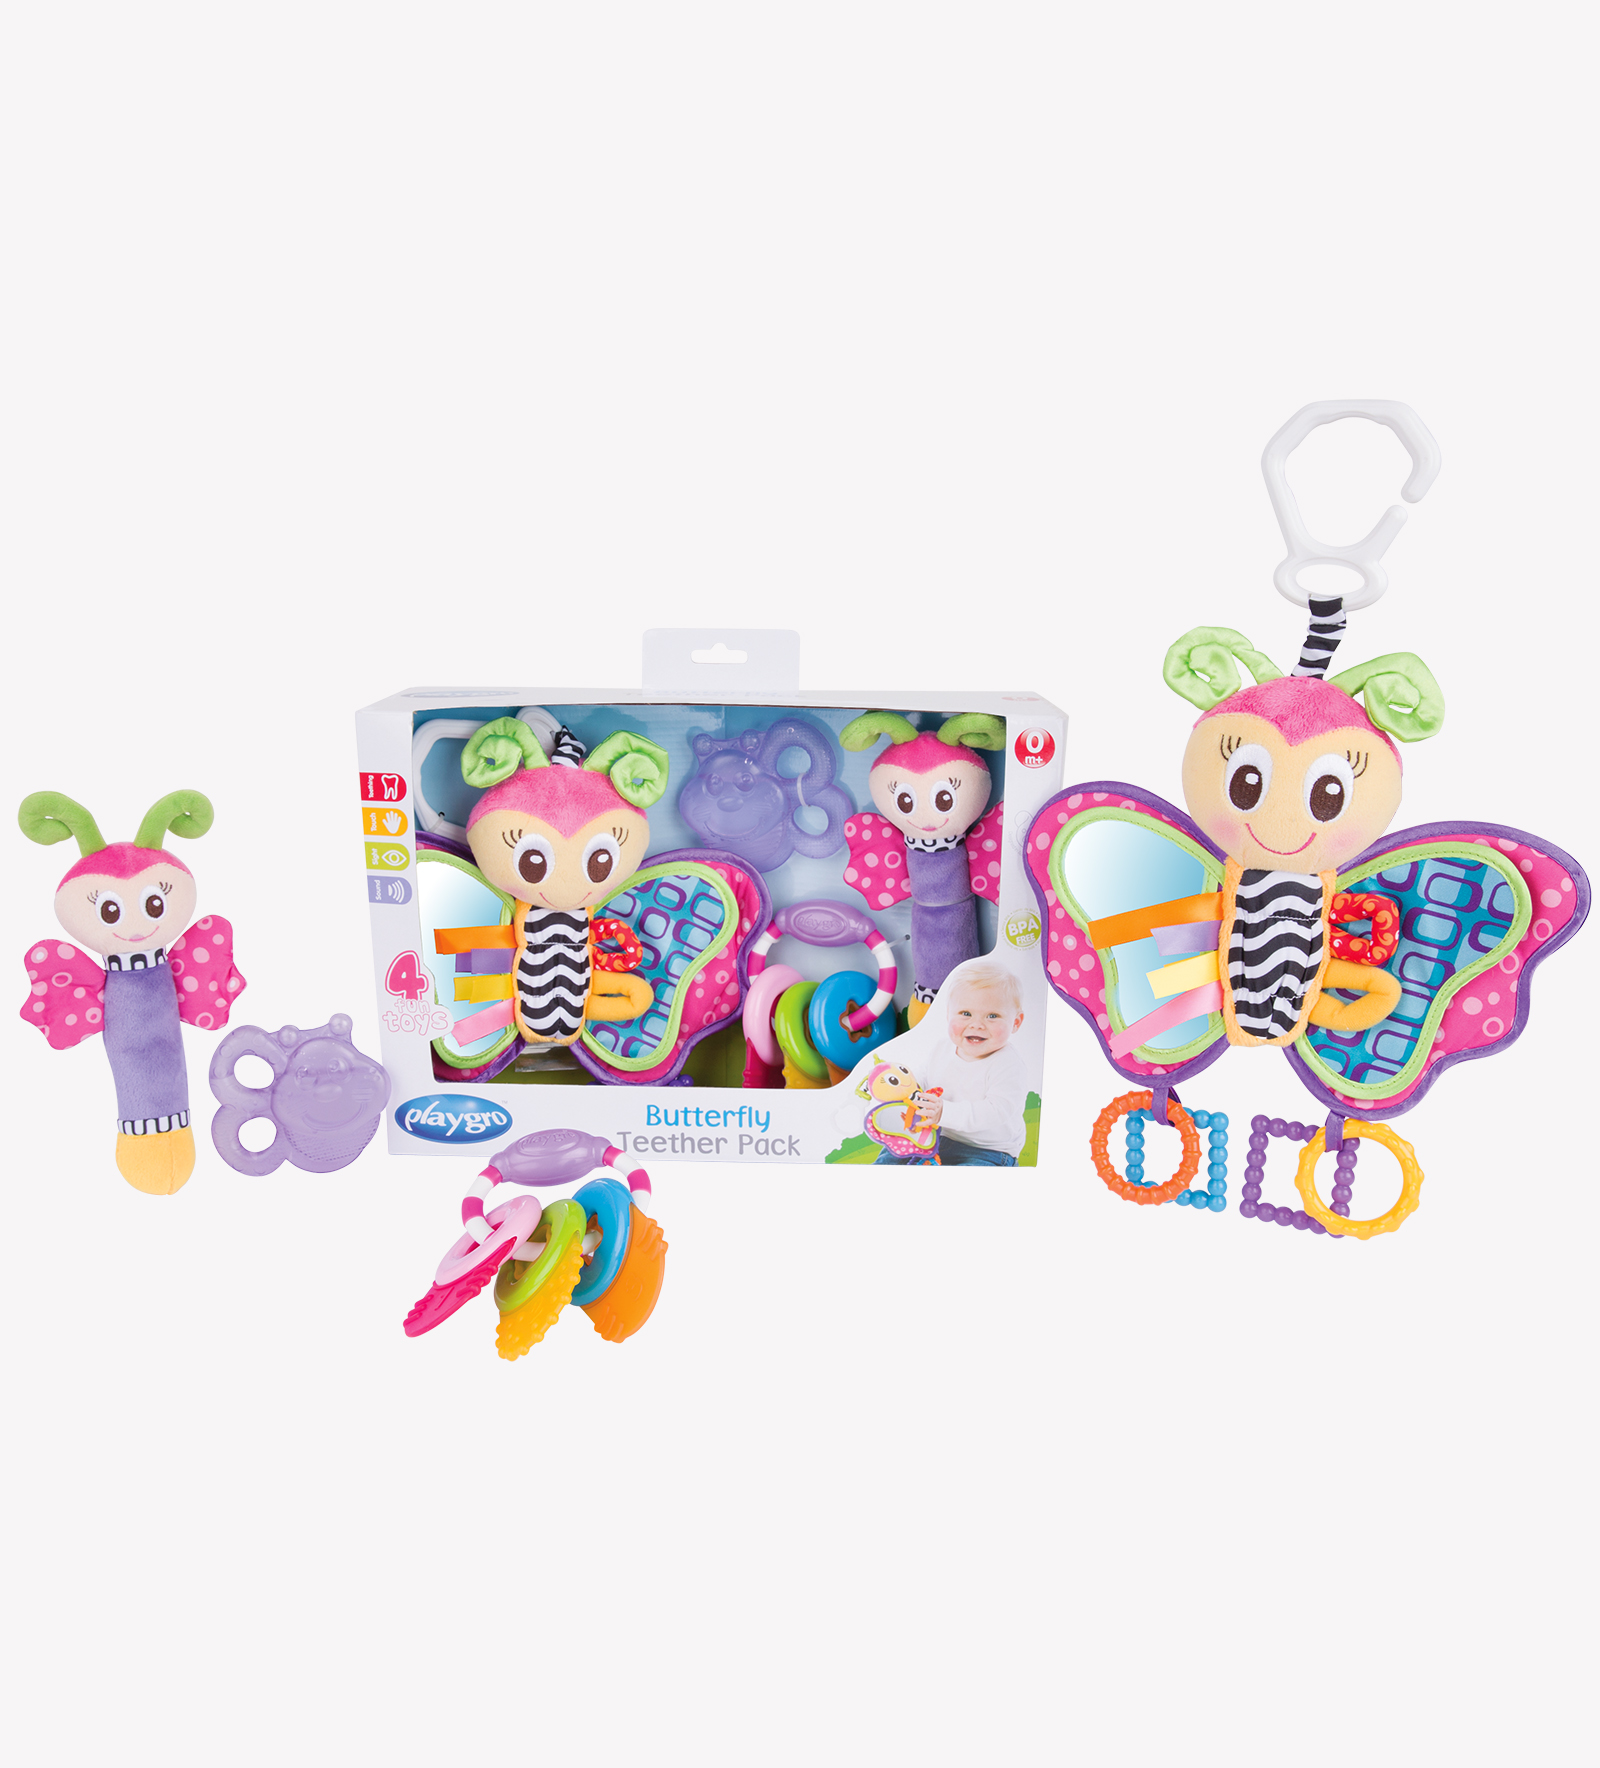 4 Fun Toys Set Playgro Butterfly Teether Pack for baby 